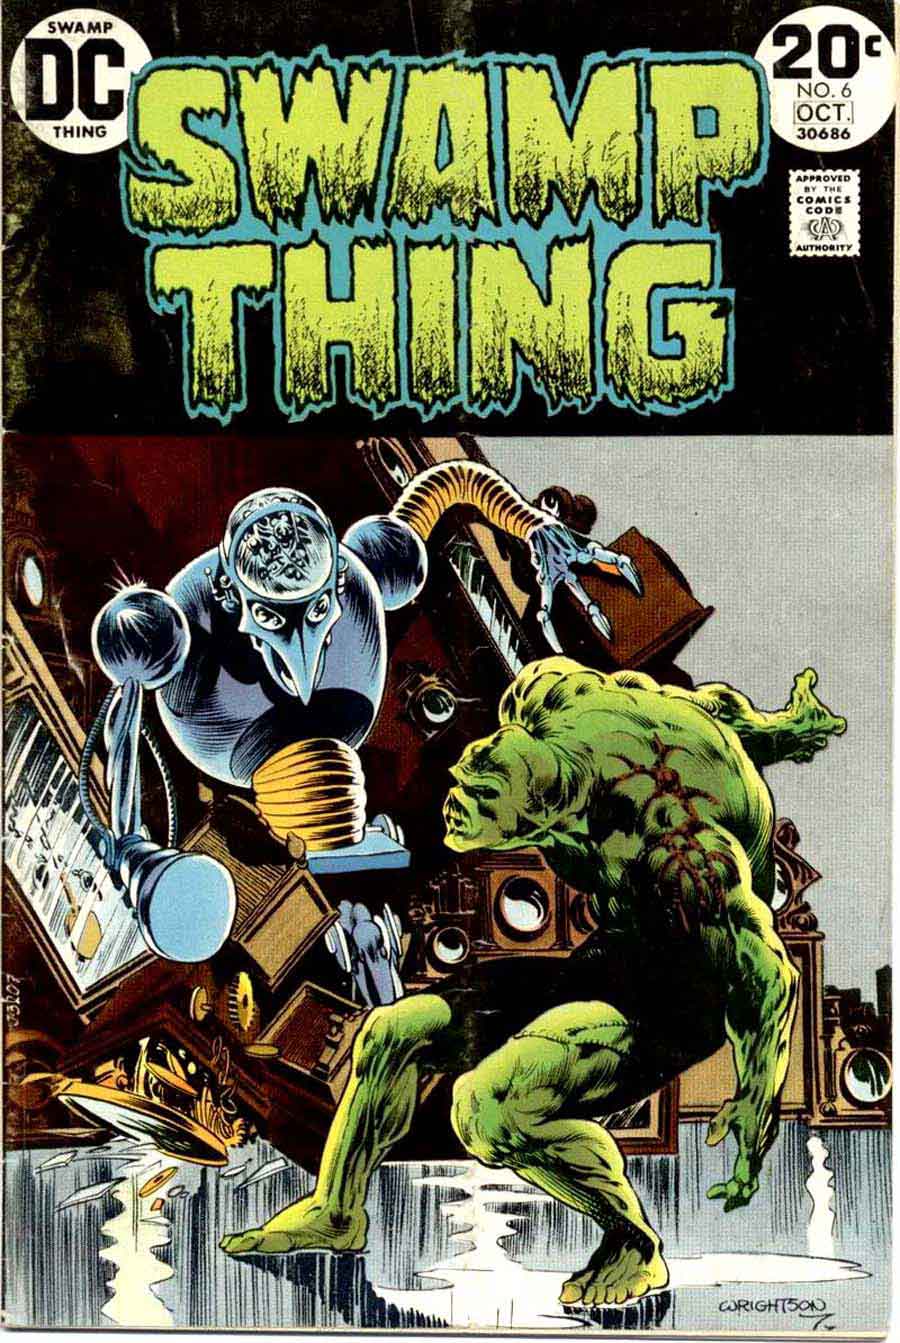 Swamp Thing #6 bronze age 1970s dc comic book cover art by Bernie Wrightson